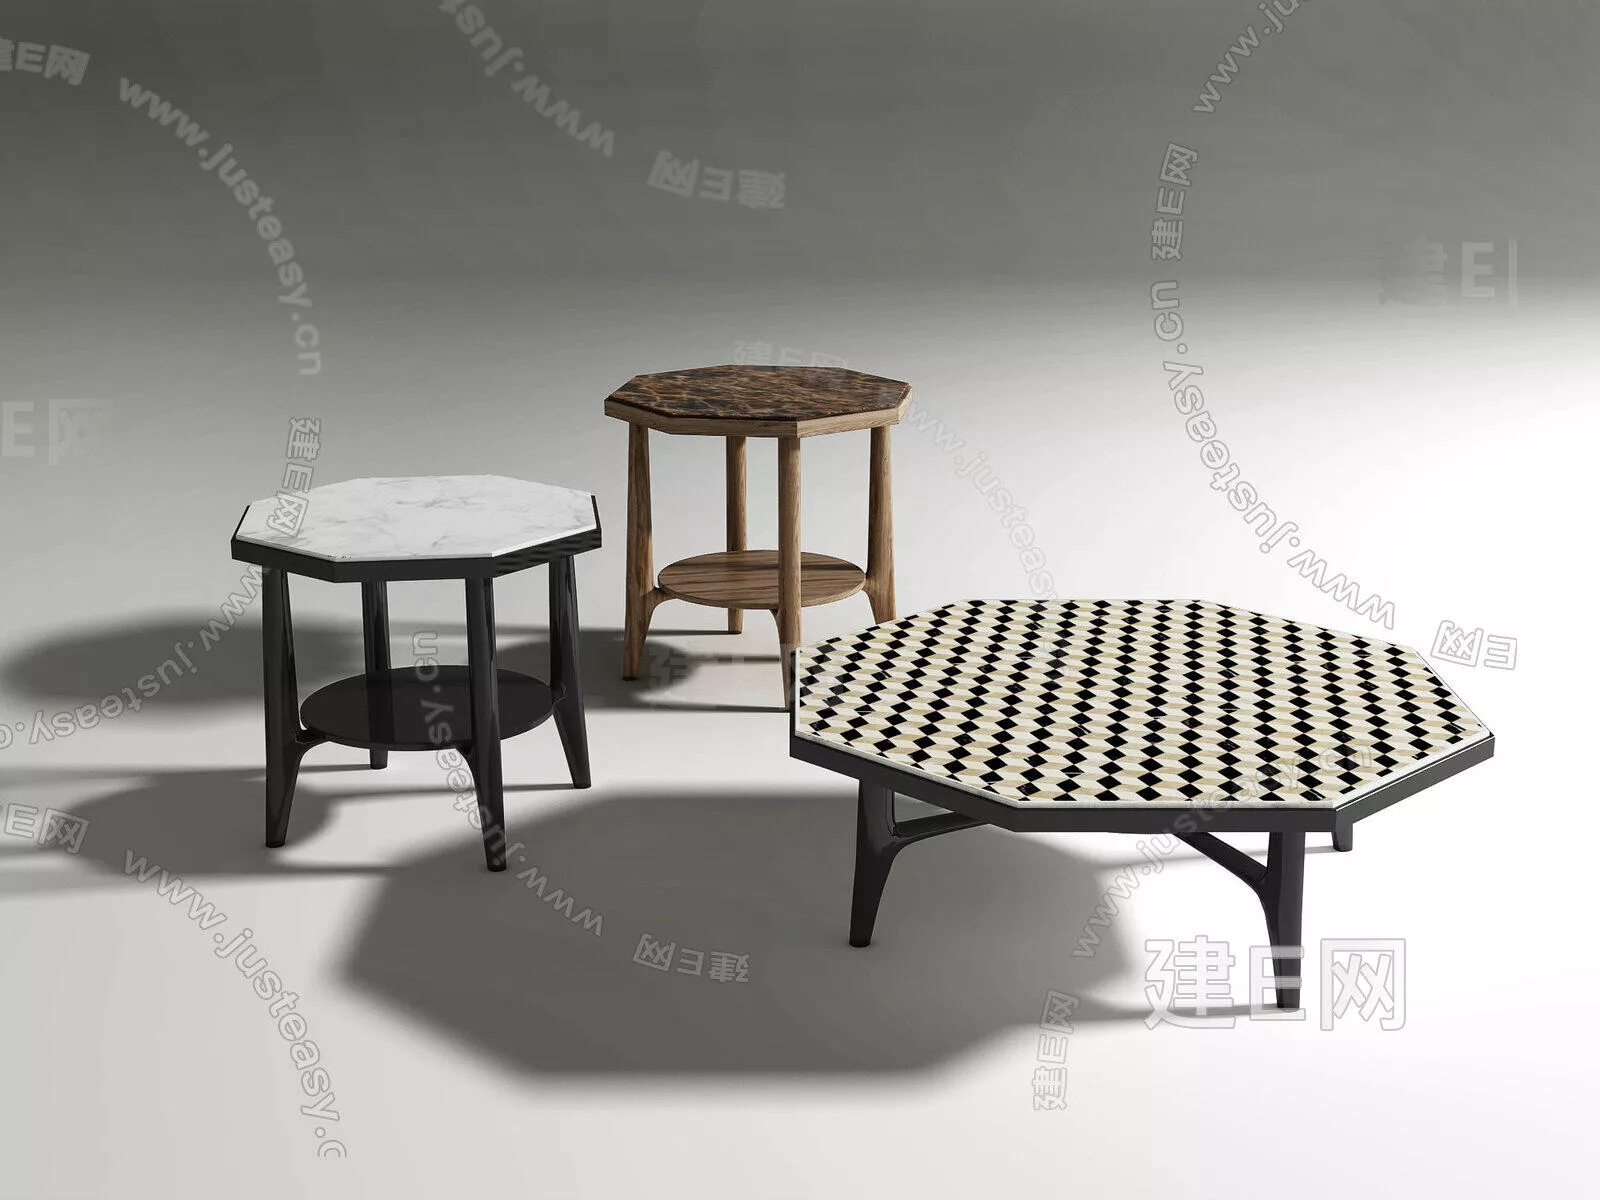 MODERN COFFEE TABLE - SKETCHUP 3D MODEL - ENSCAPE - 110710144